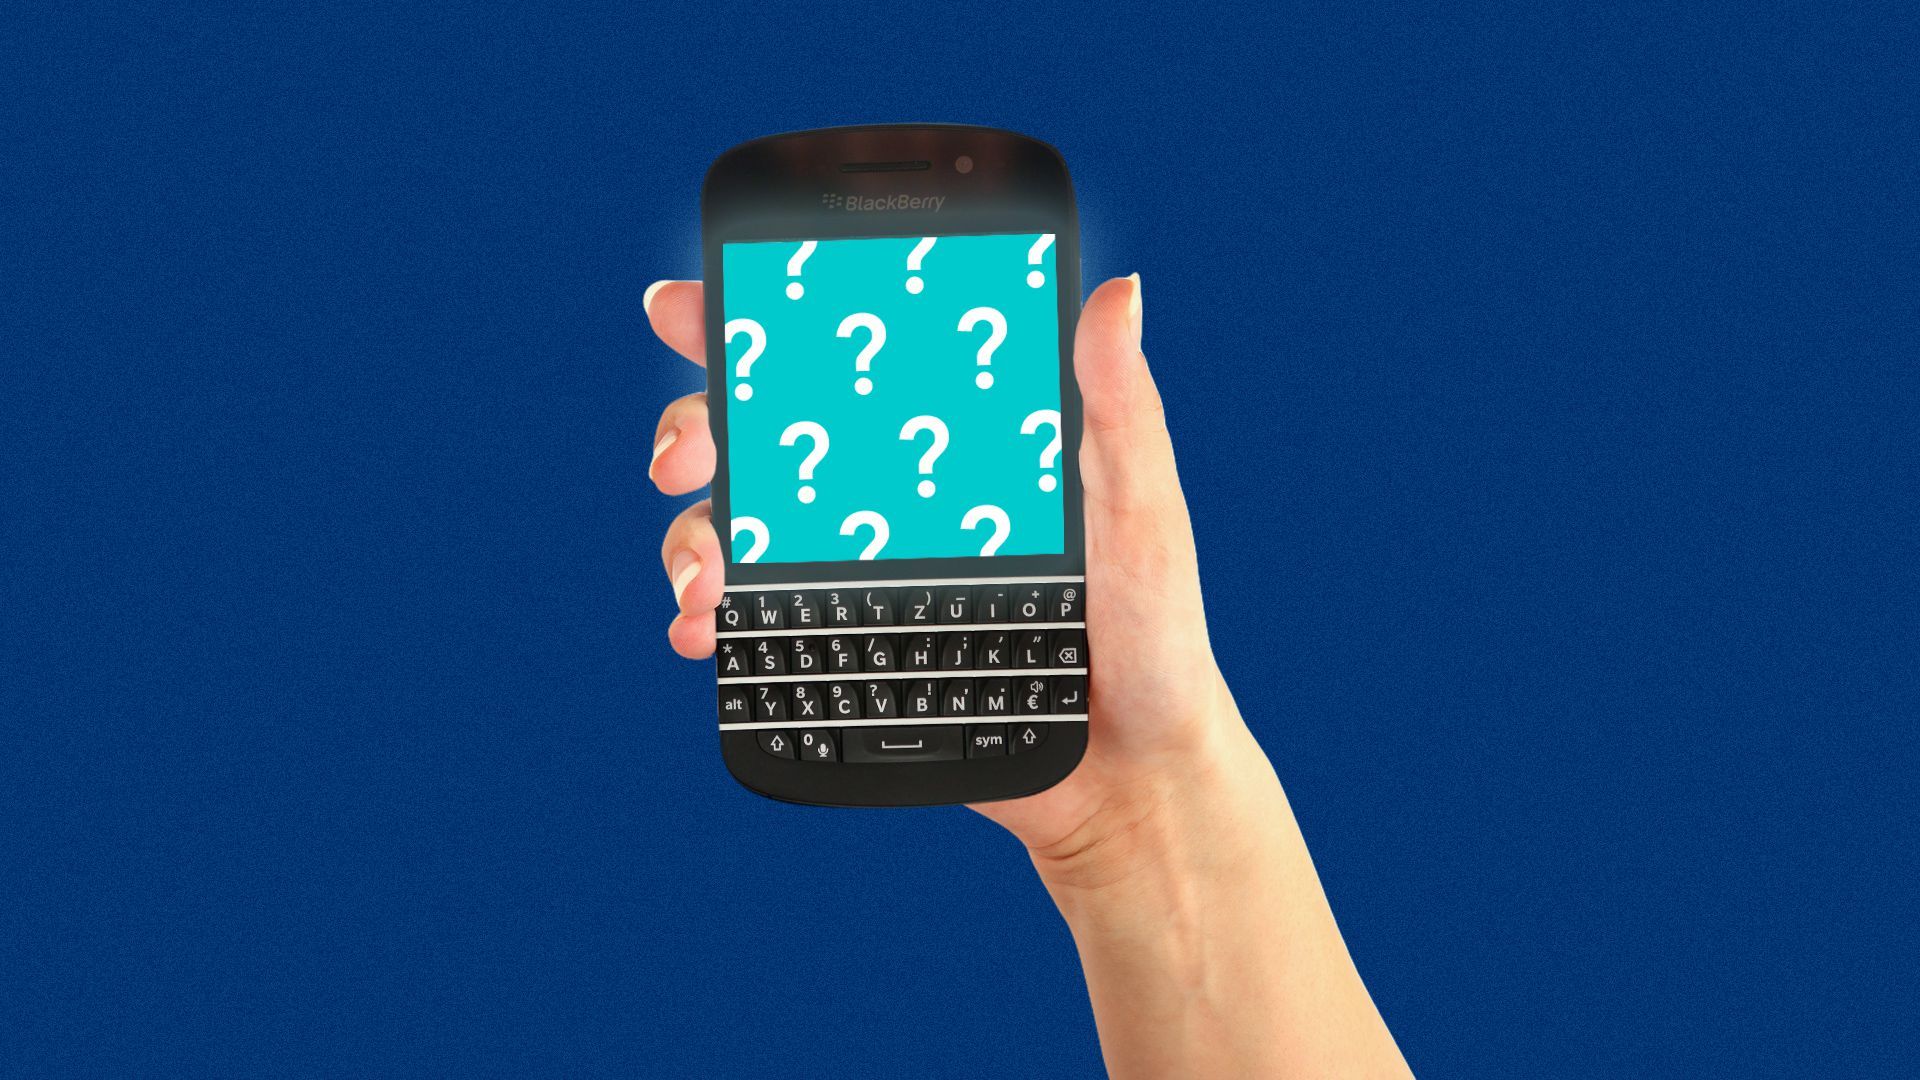 An illustration of a BlackBerry device with question marks on the screen